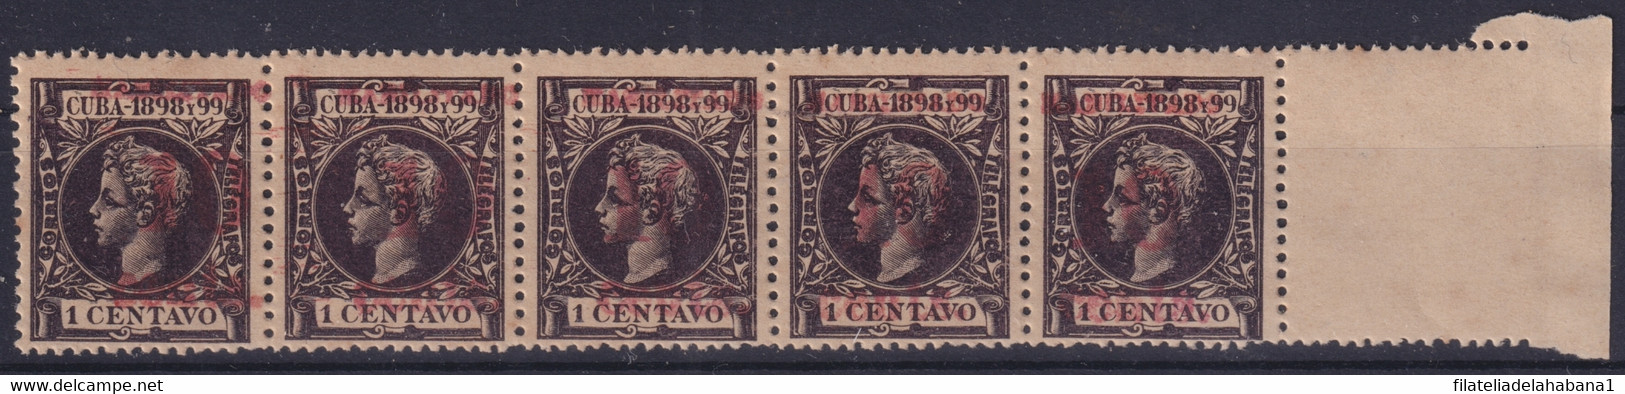 1899-486 CUBA 1899 10c S. 1c US OCCUPATION 4th ISSUE COMPLETE TRIP PHILATELIC FORGERY. - Nuovi